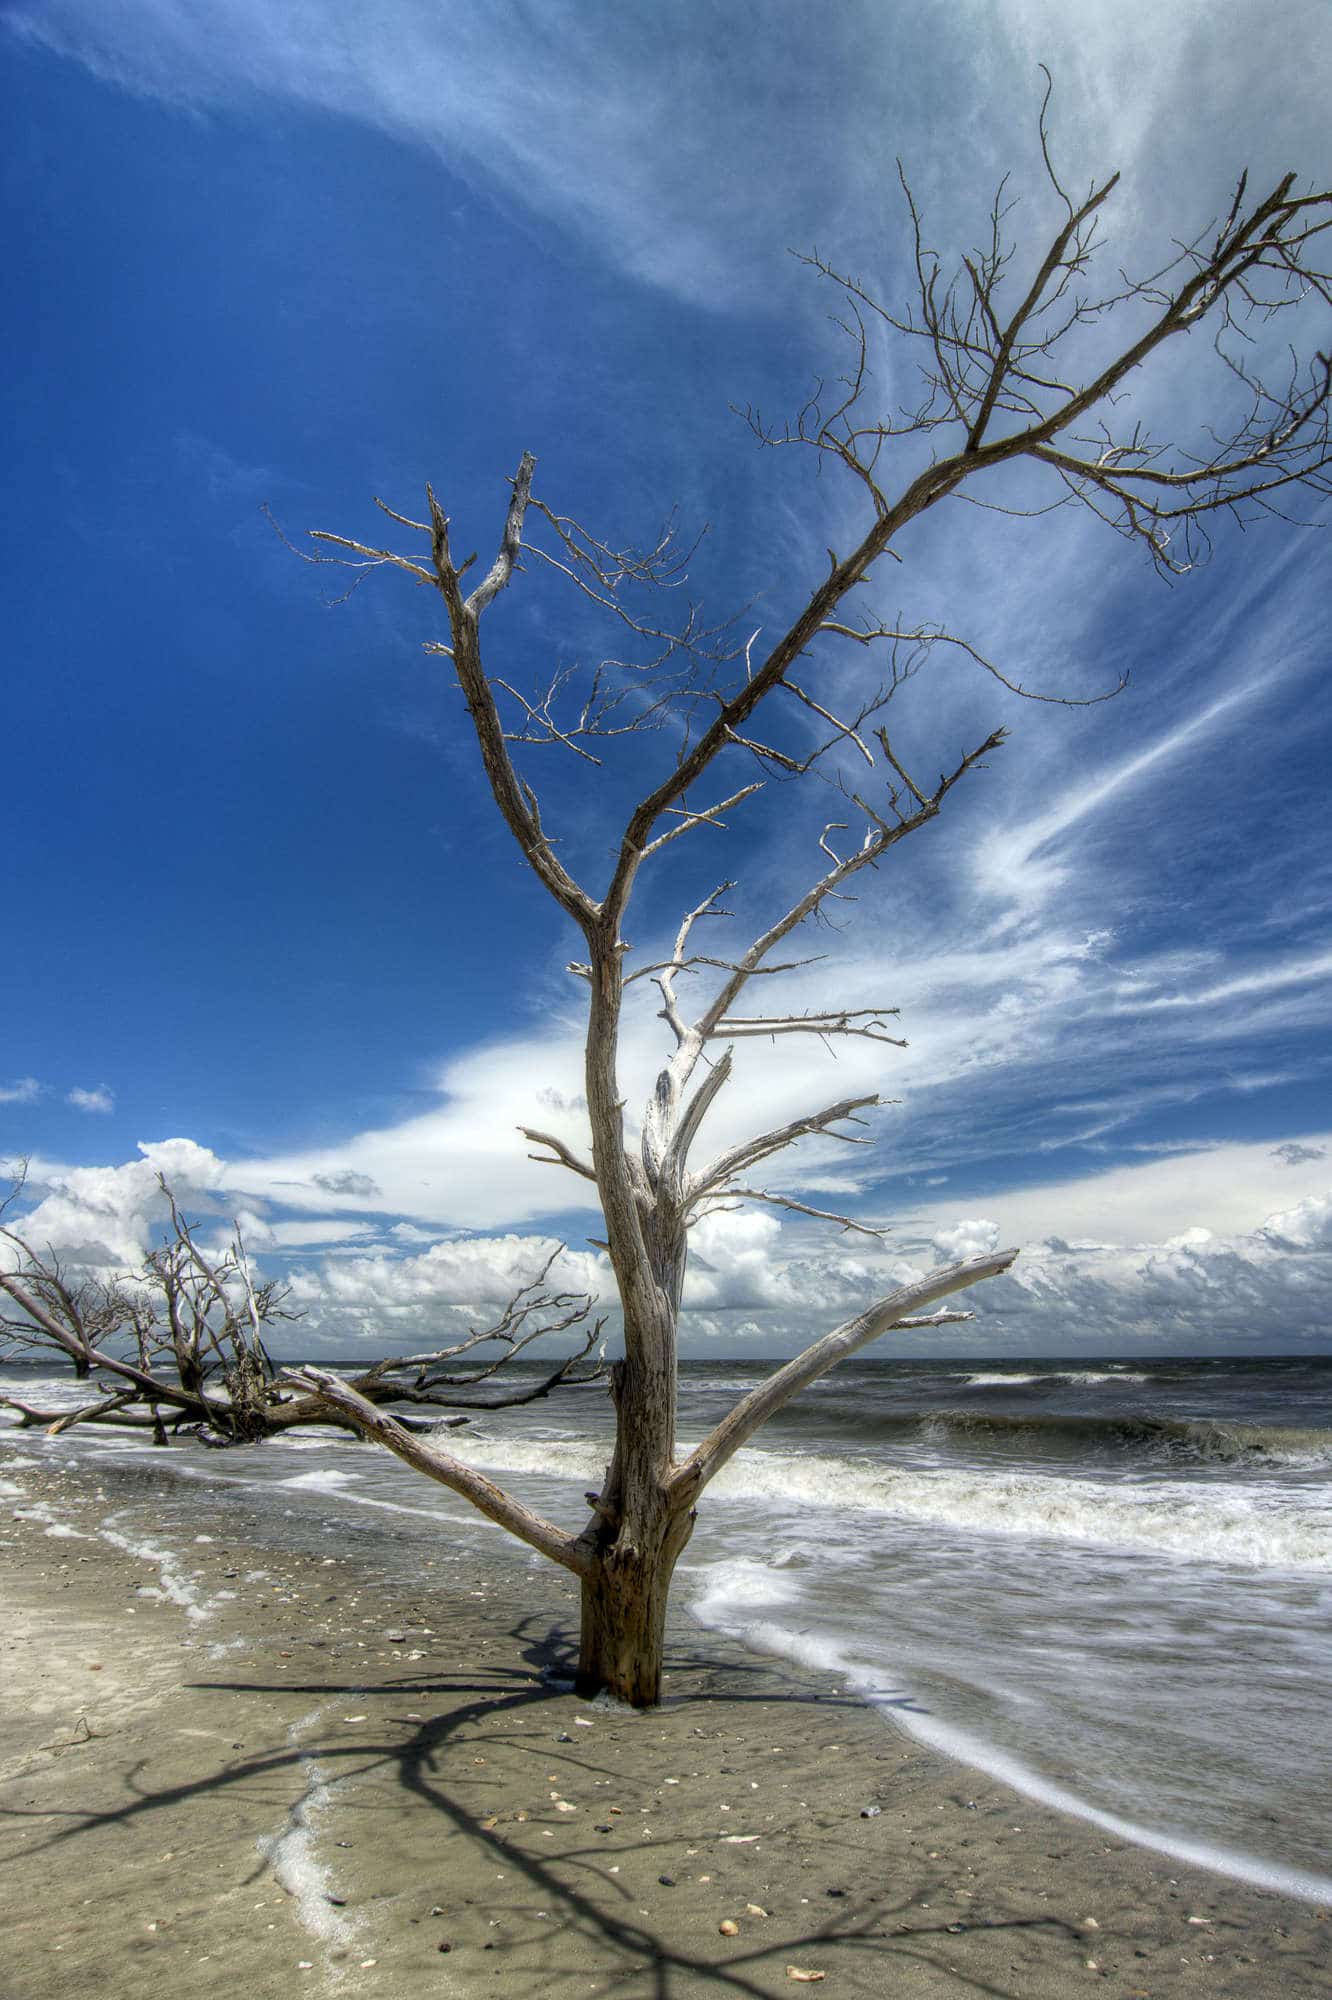 Several deadwood trees stand along the sandy beach at Botany Bay in South Carolina.